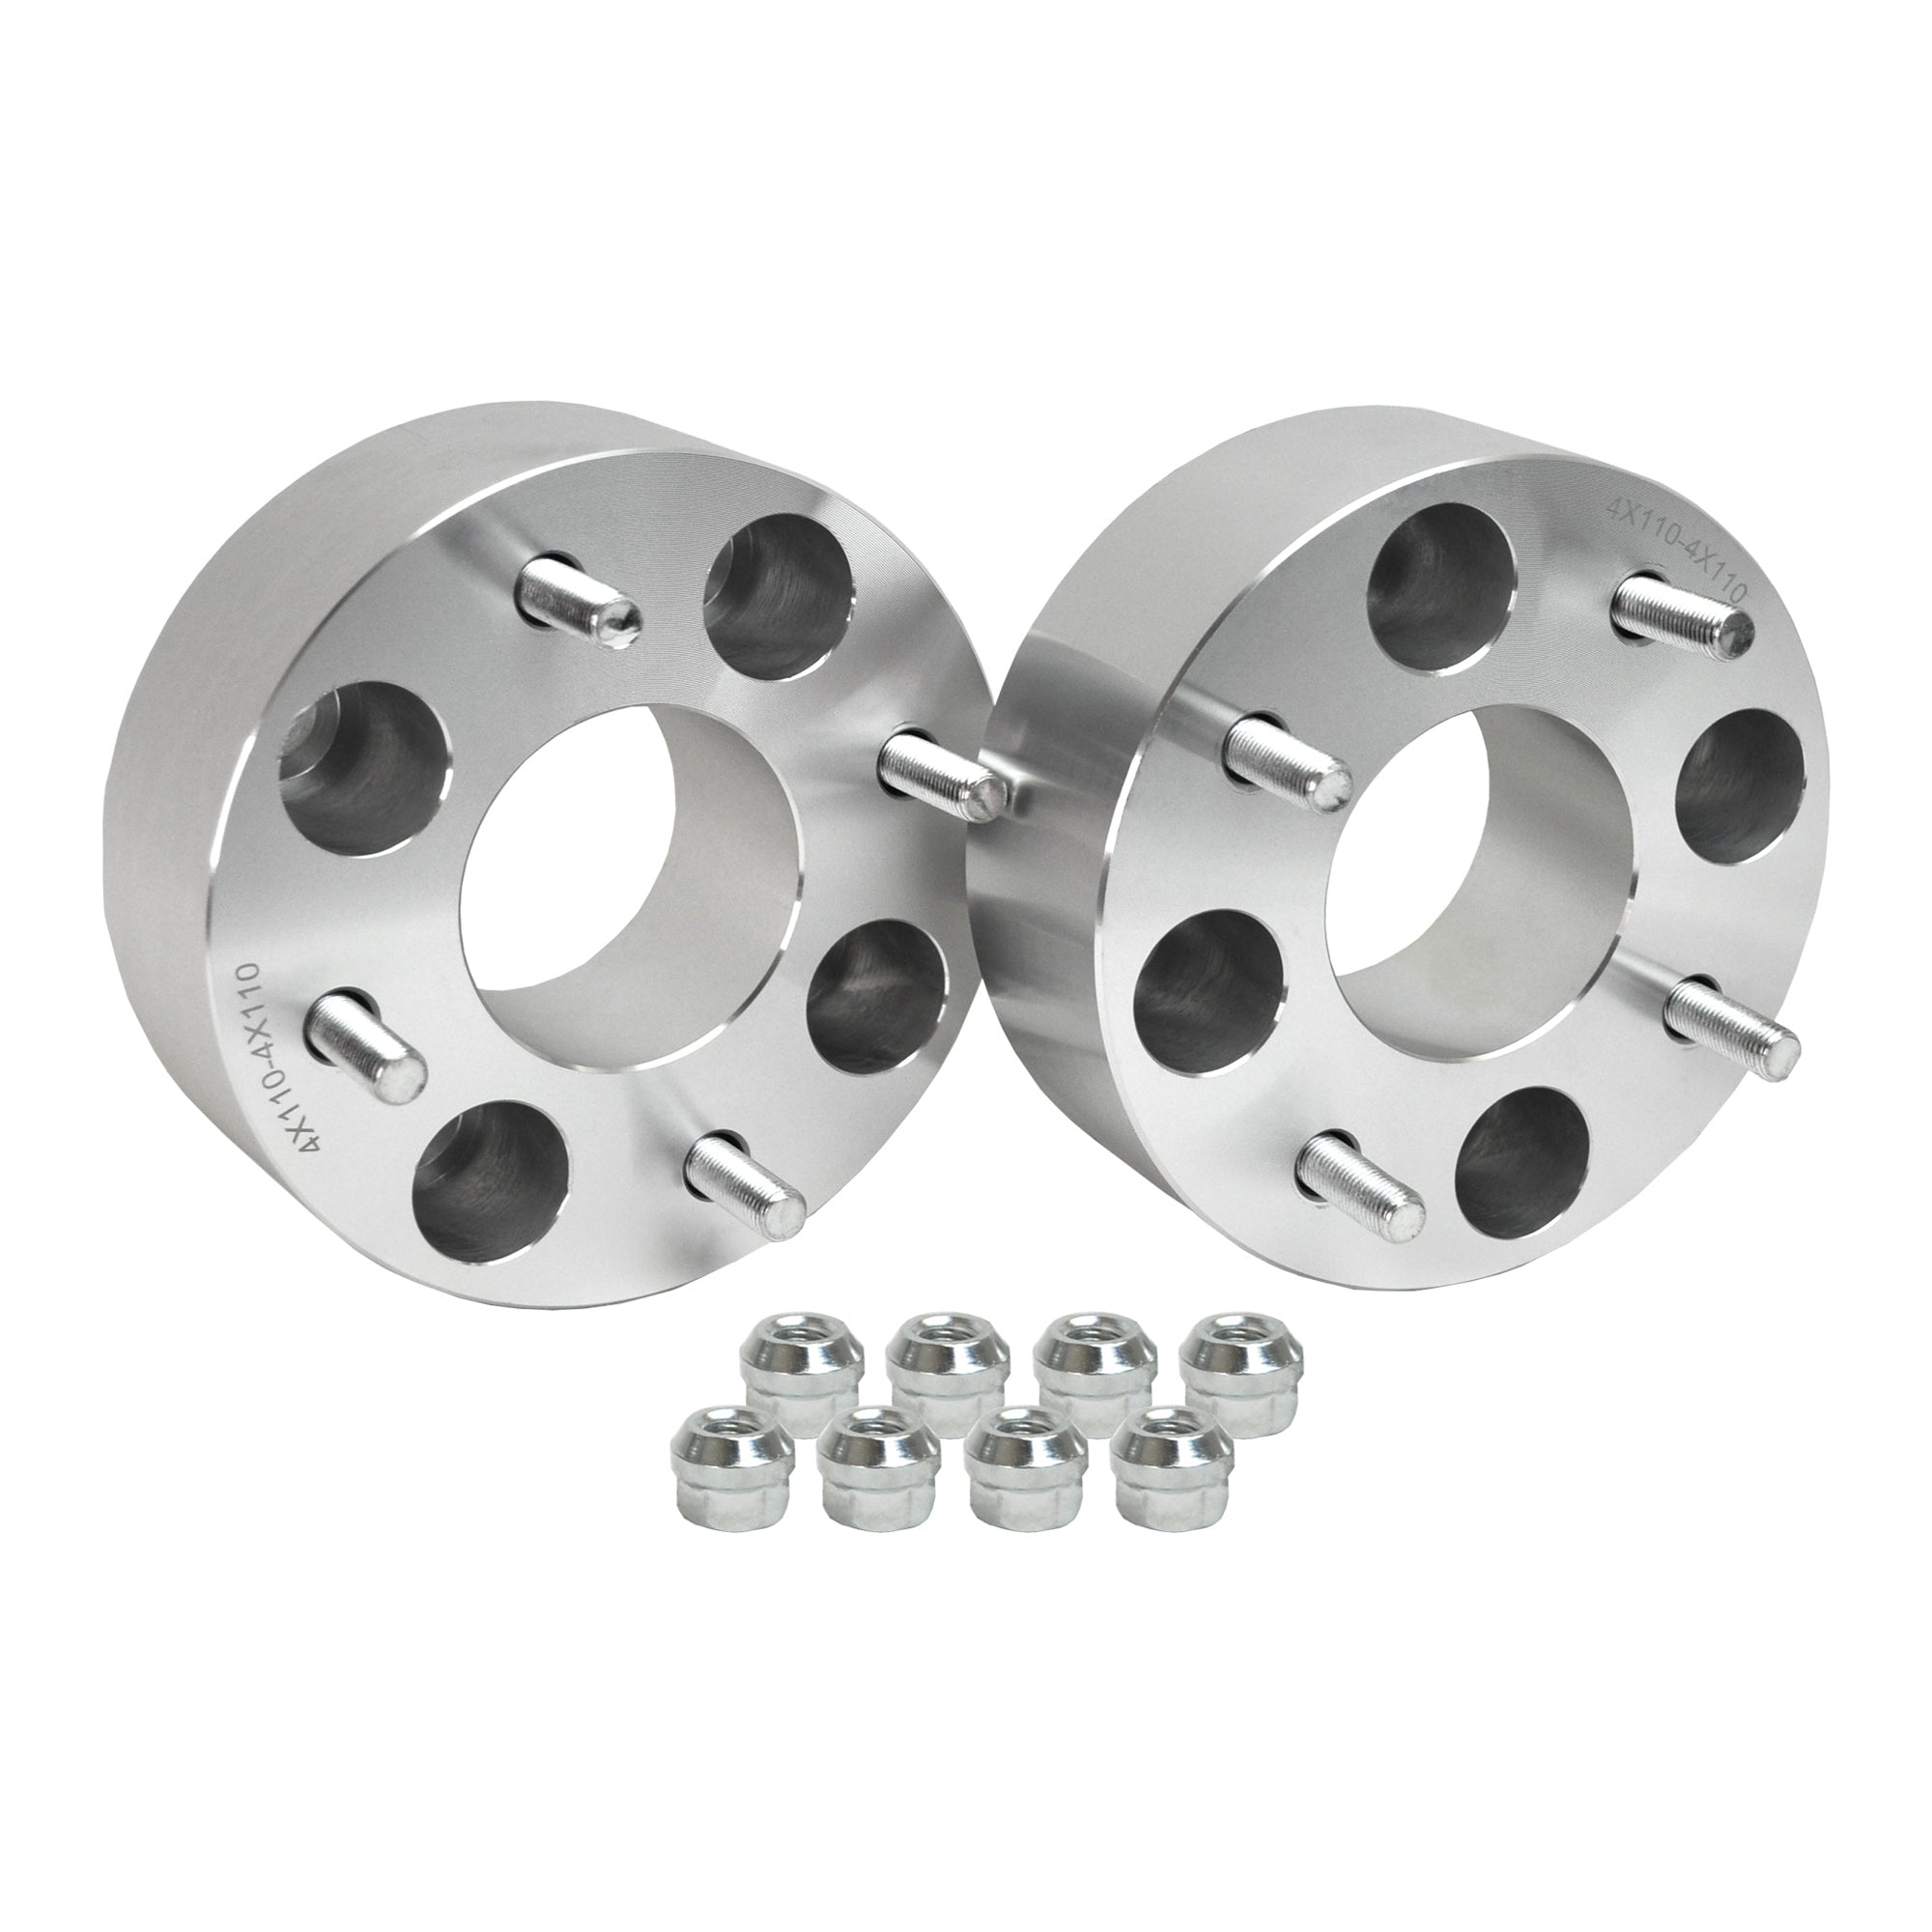 Wheel Spacer for Bombardier Traxter 650 Max 